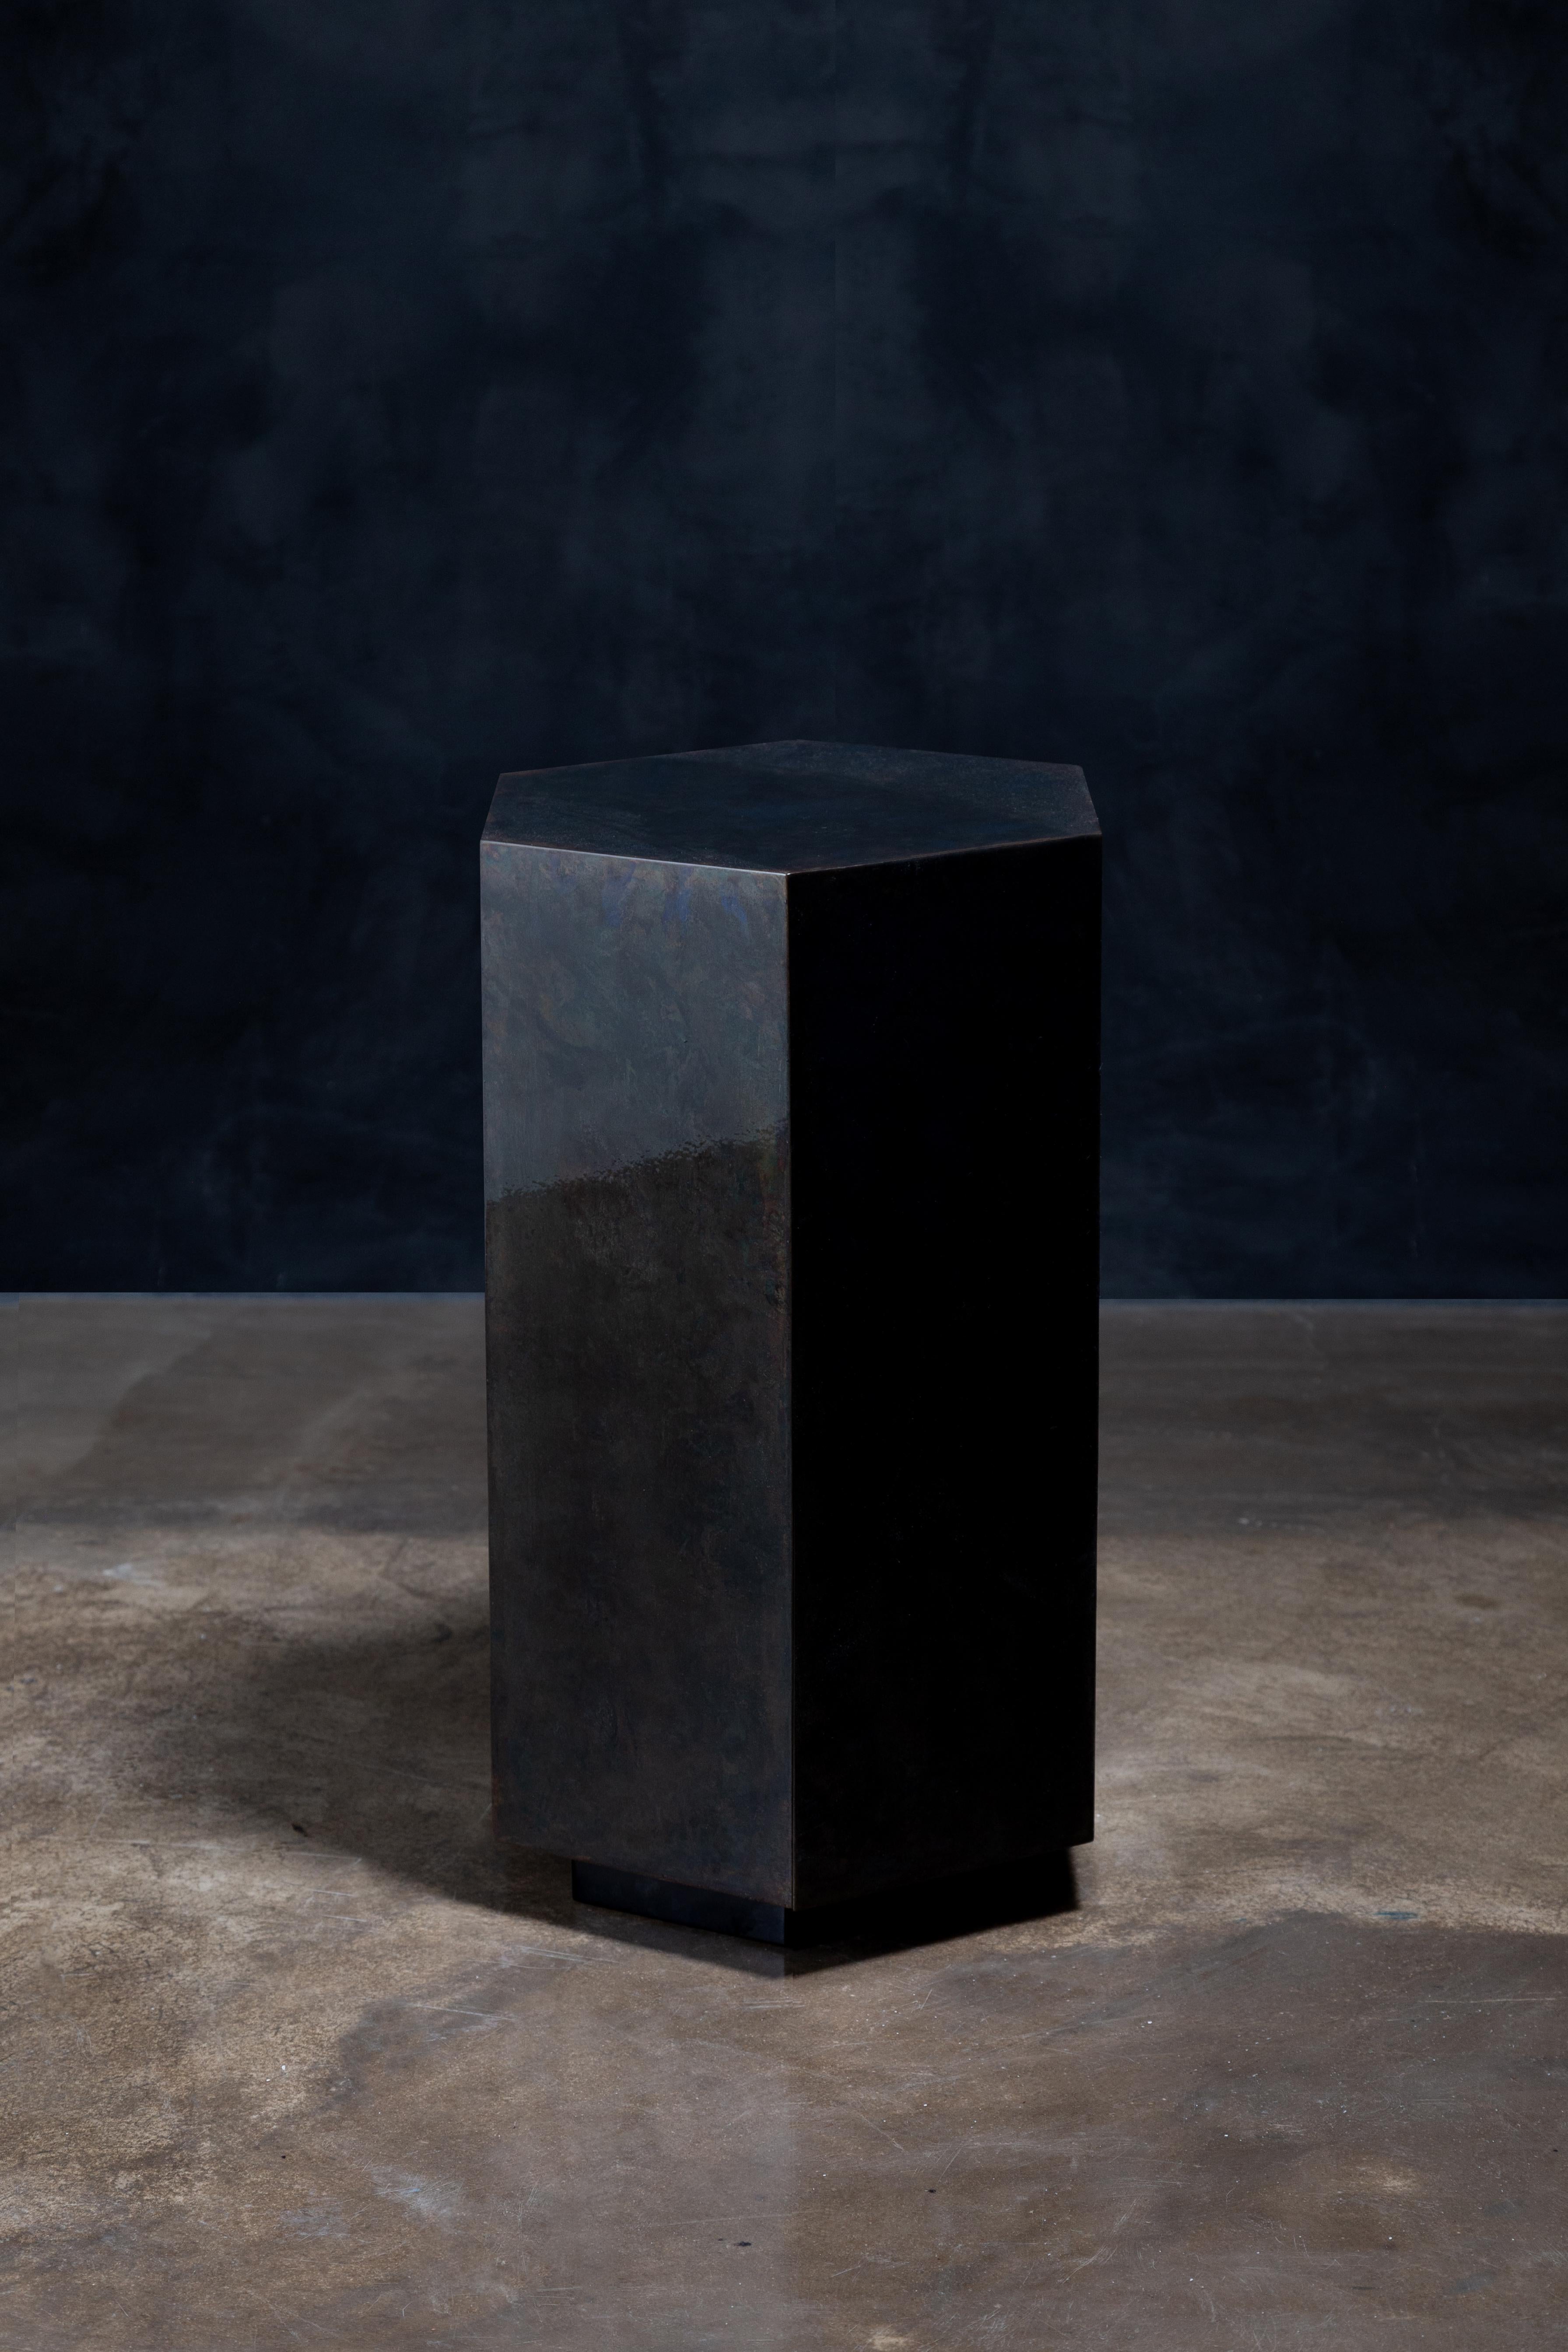 Ettore Hex's name comes from its hexagonal shape and can be specified in any of Costantini’s available materials
and finishes. Shown here in patinated steel, this side table feature a modern, geometric shape that allows the
subtle variations of